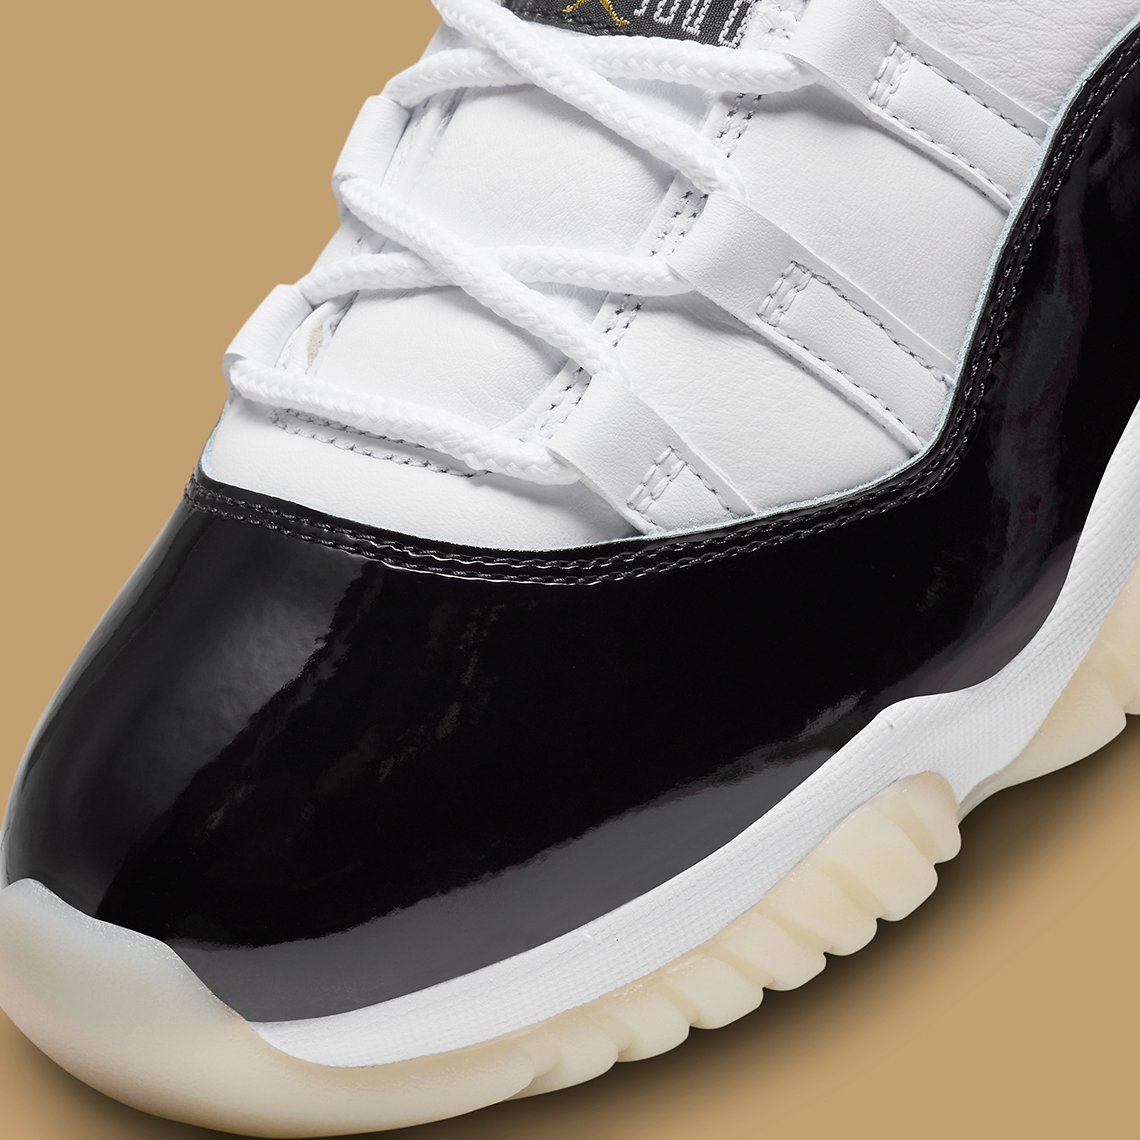 Everything You Need To Know About The Air Jordan 11 Gratitude